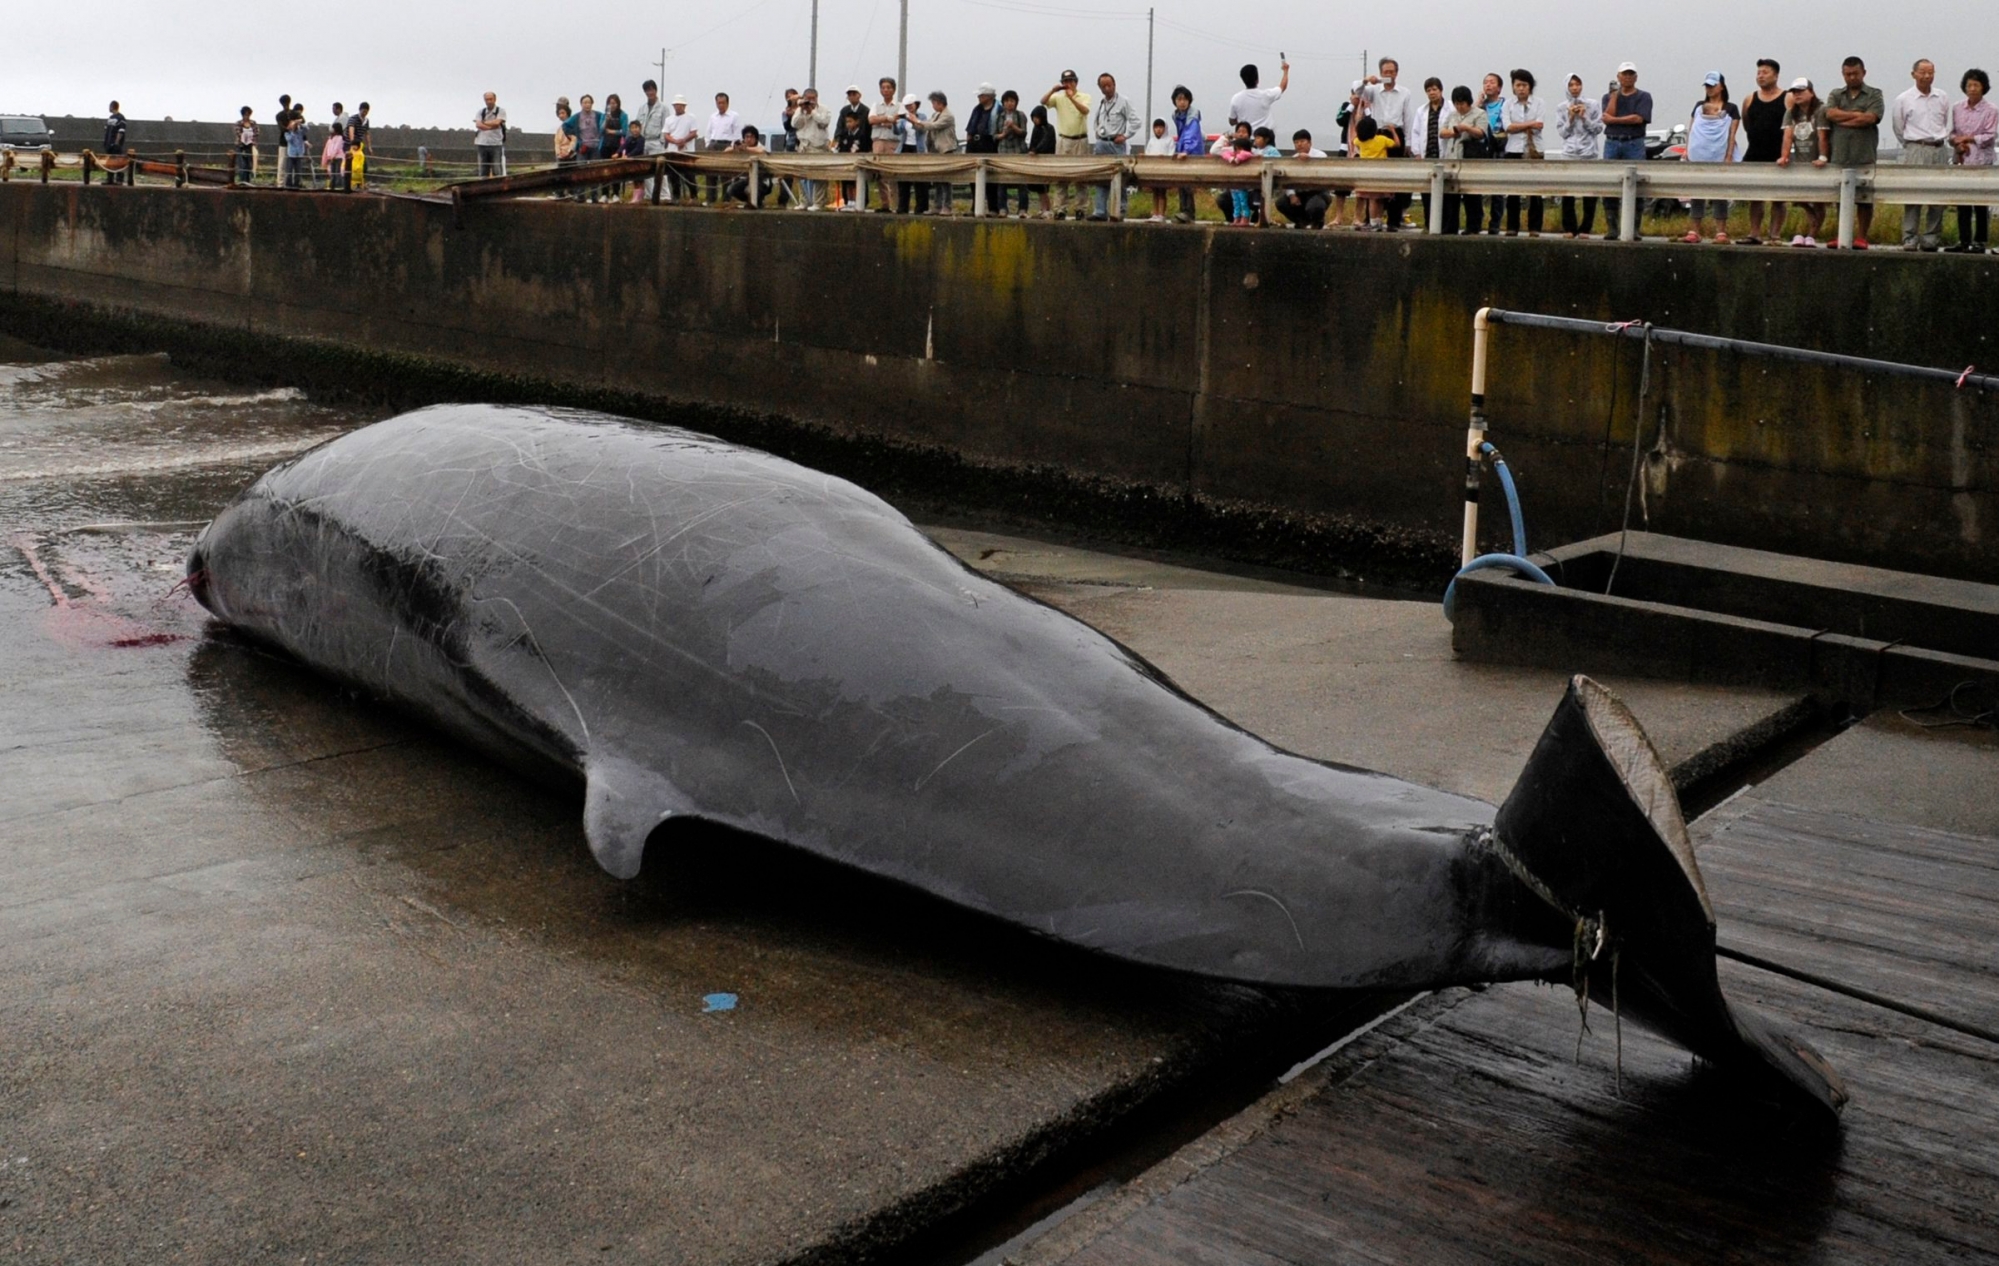 In this June 21, 2009, photo, a Baird's beaked whale, which was caught some 60 kilometers (38 miles) off the coast, is seen at a fishing port, in Wada, southeast of Tokyo. Japan announced Wednesday, Dec. 26, 2018, it is leaving the International Whaling Commission to resume hunting the animals for commercial use but said it will no longer go to the Antarctic for its much-criticized annual killings of hundreds of whales. Japan has hunted whales for centuries, but has reduced its catch following international protests and declining demand for whale meat at home.(AP Photo/Shuji Kajiyama) Japan Whaling